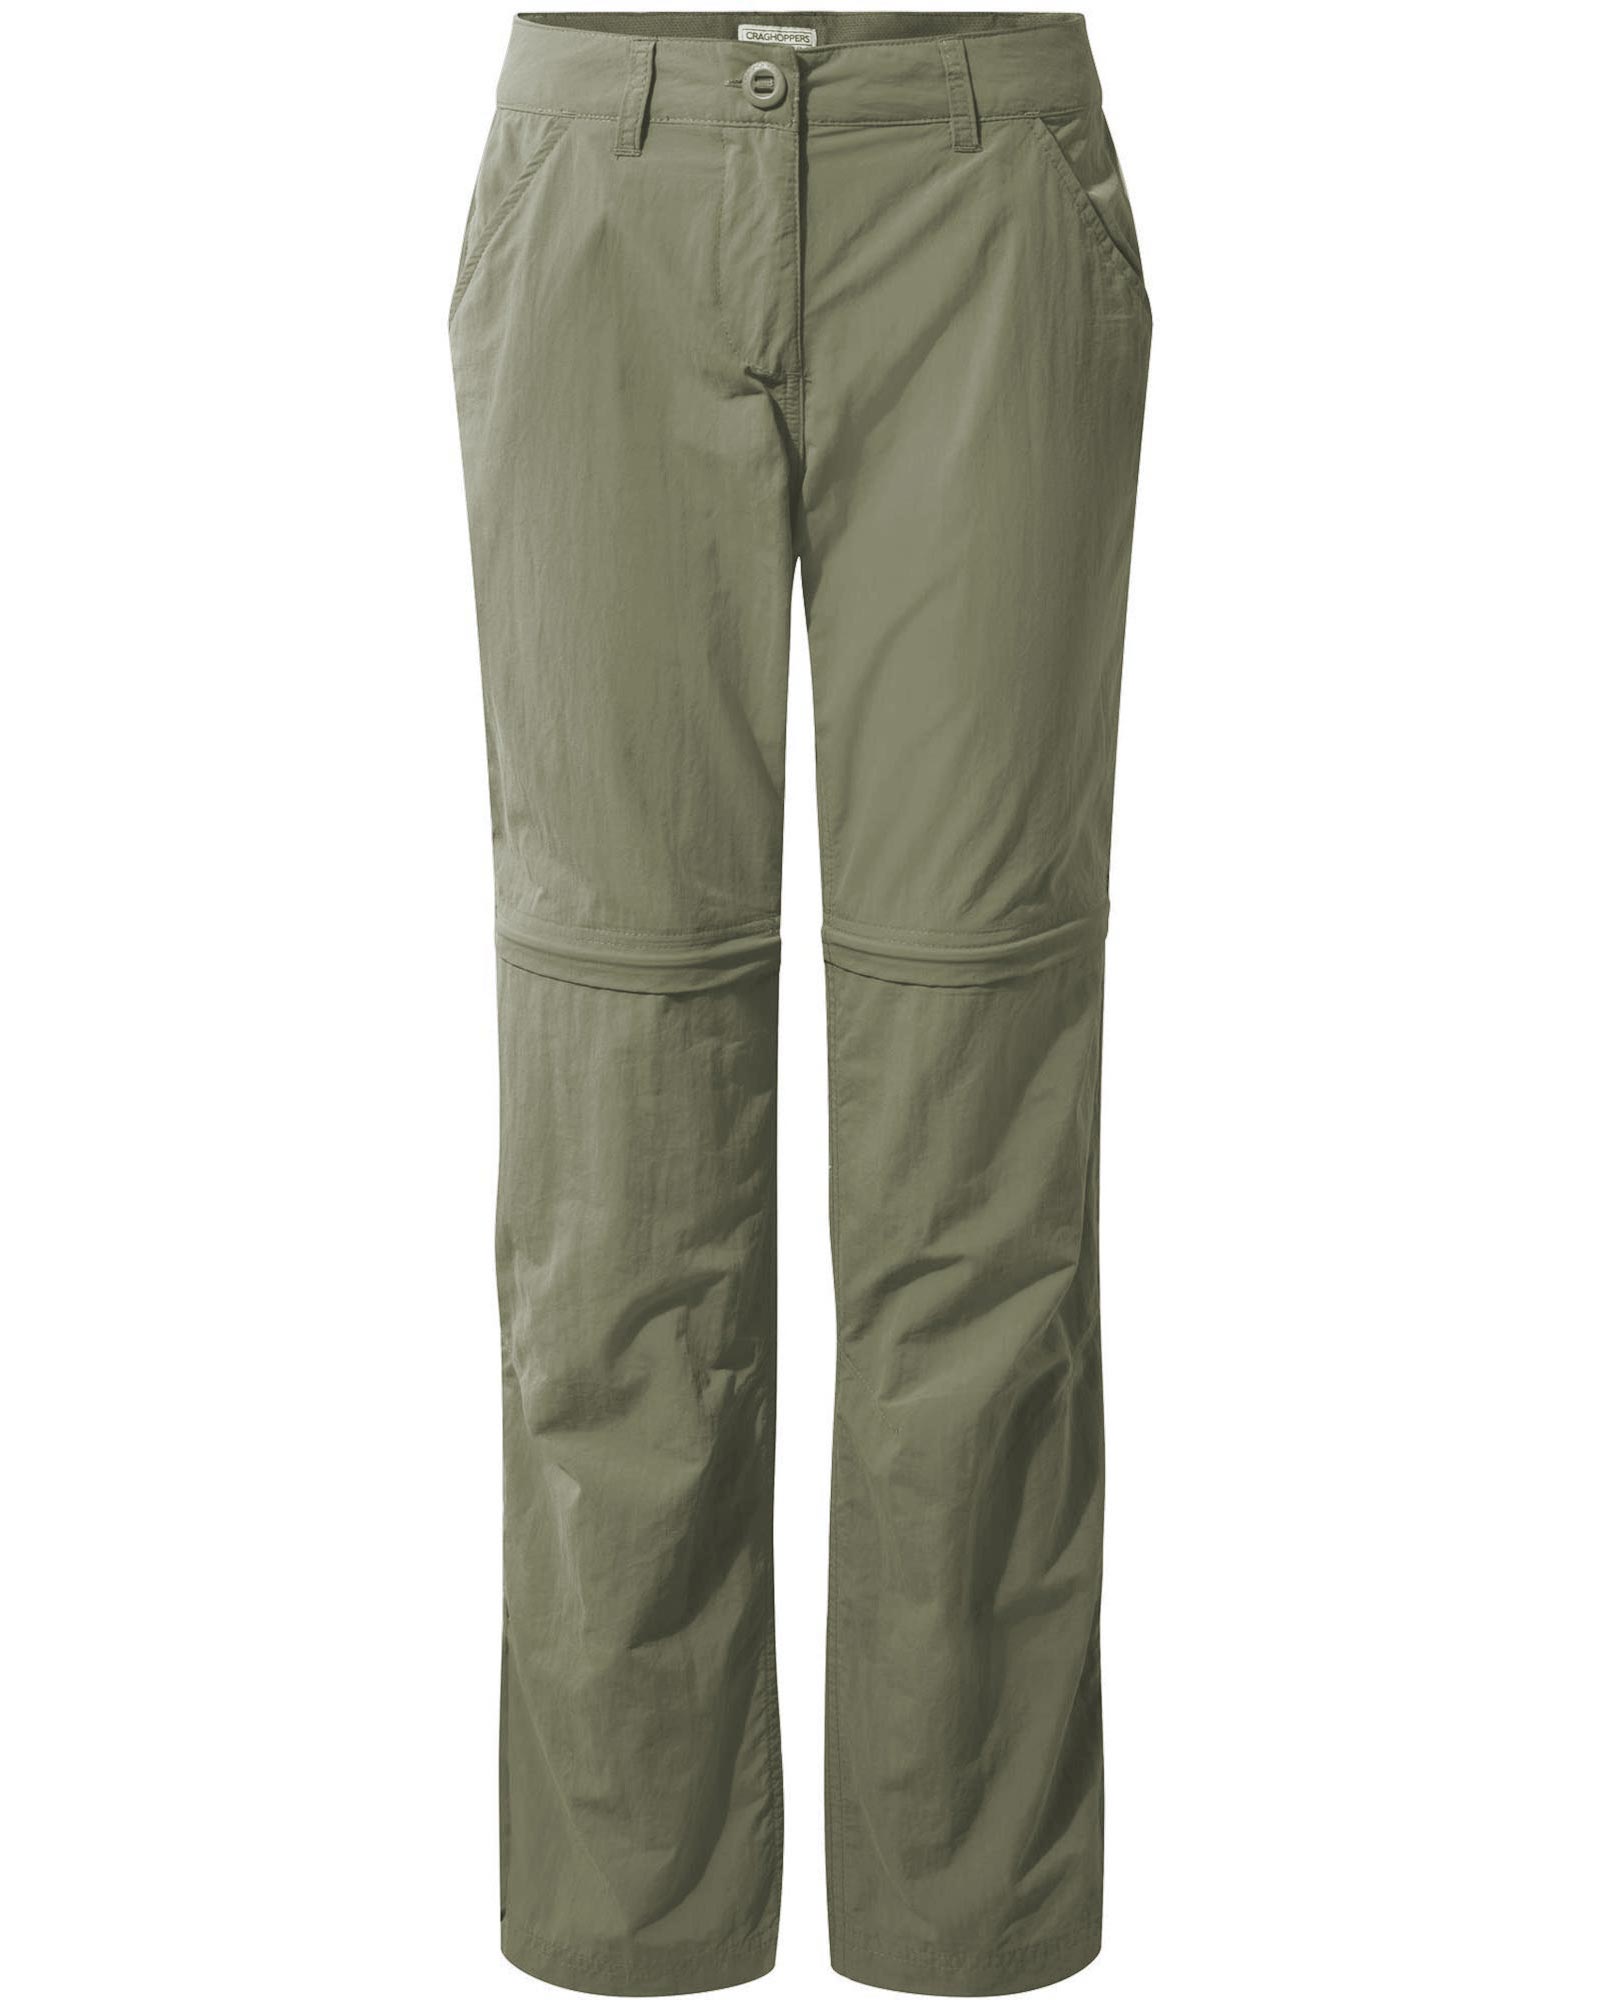 Craghoppers NosiLife Women’s Trousers - Soft Moss 18